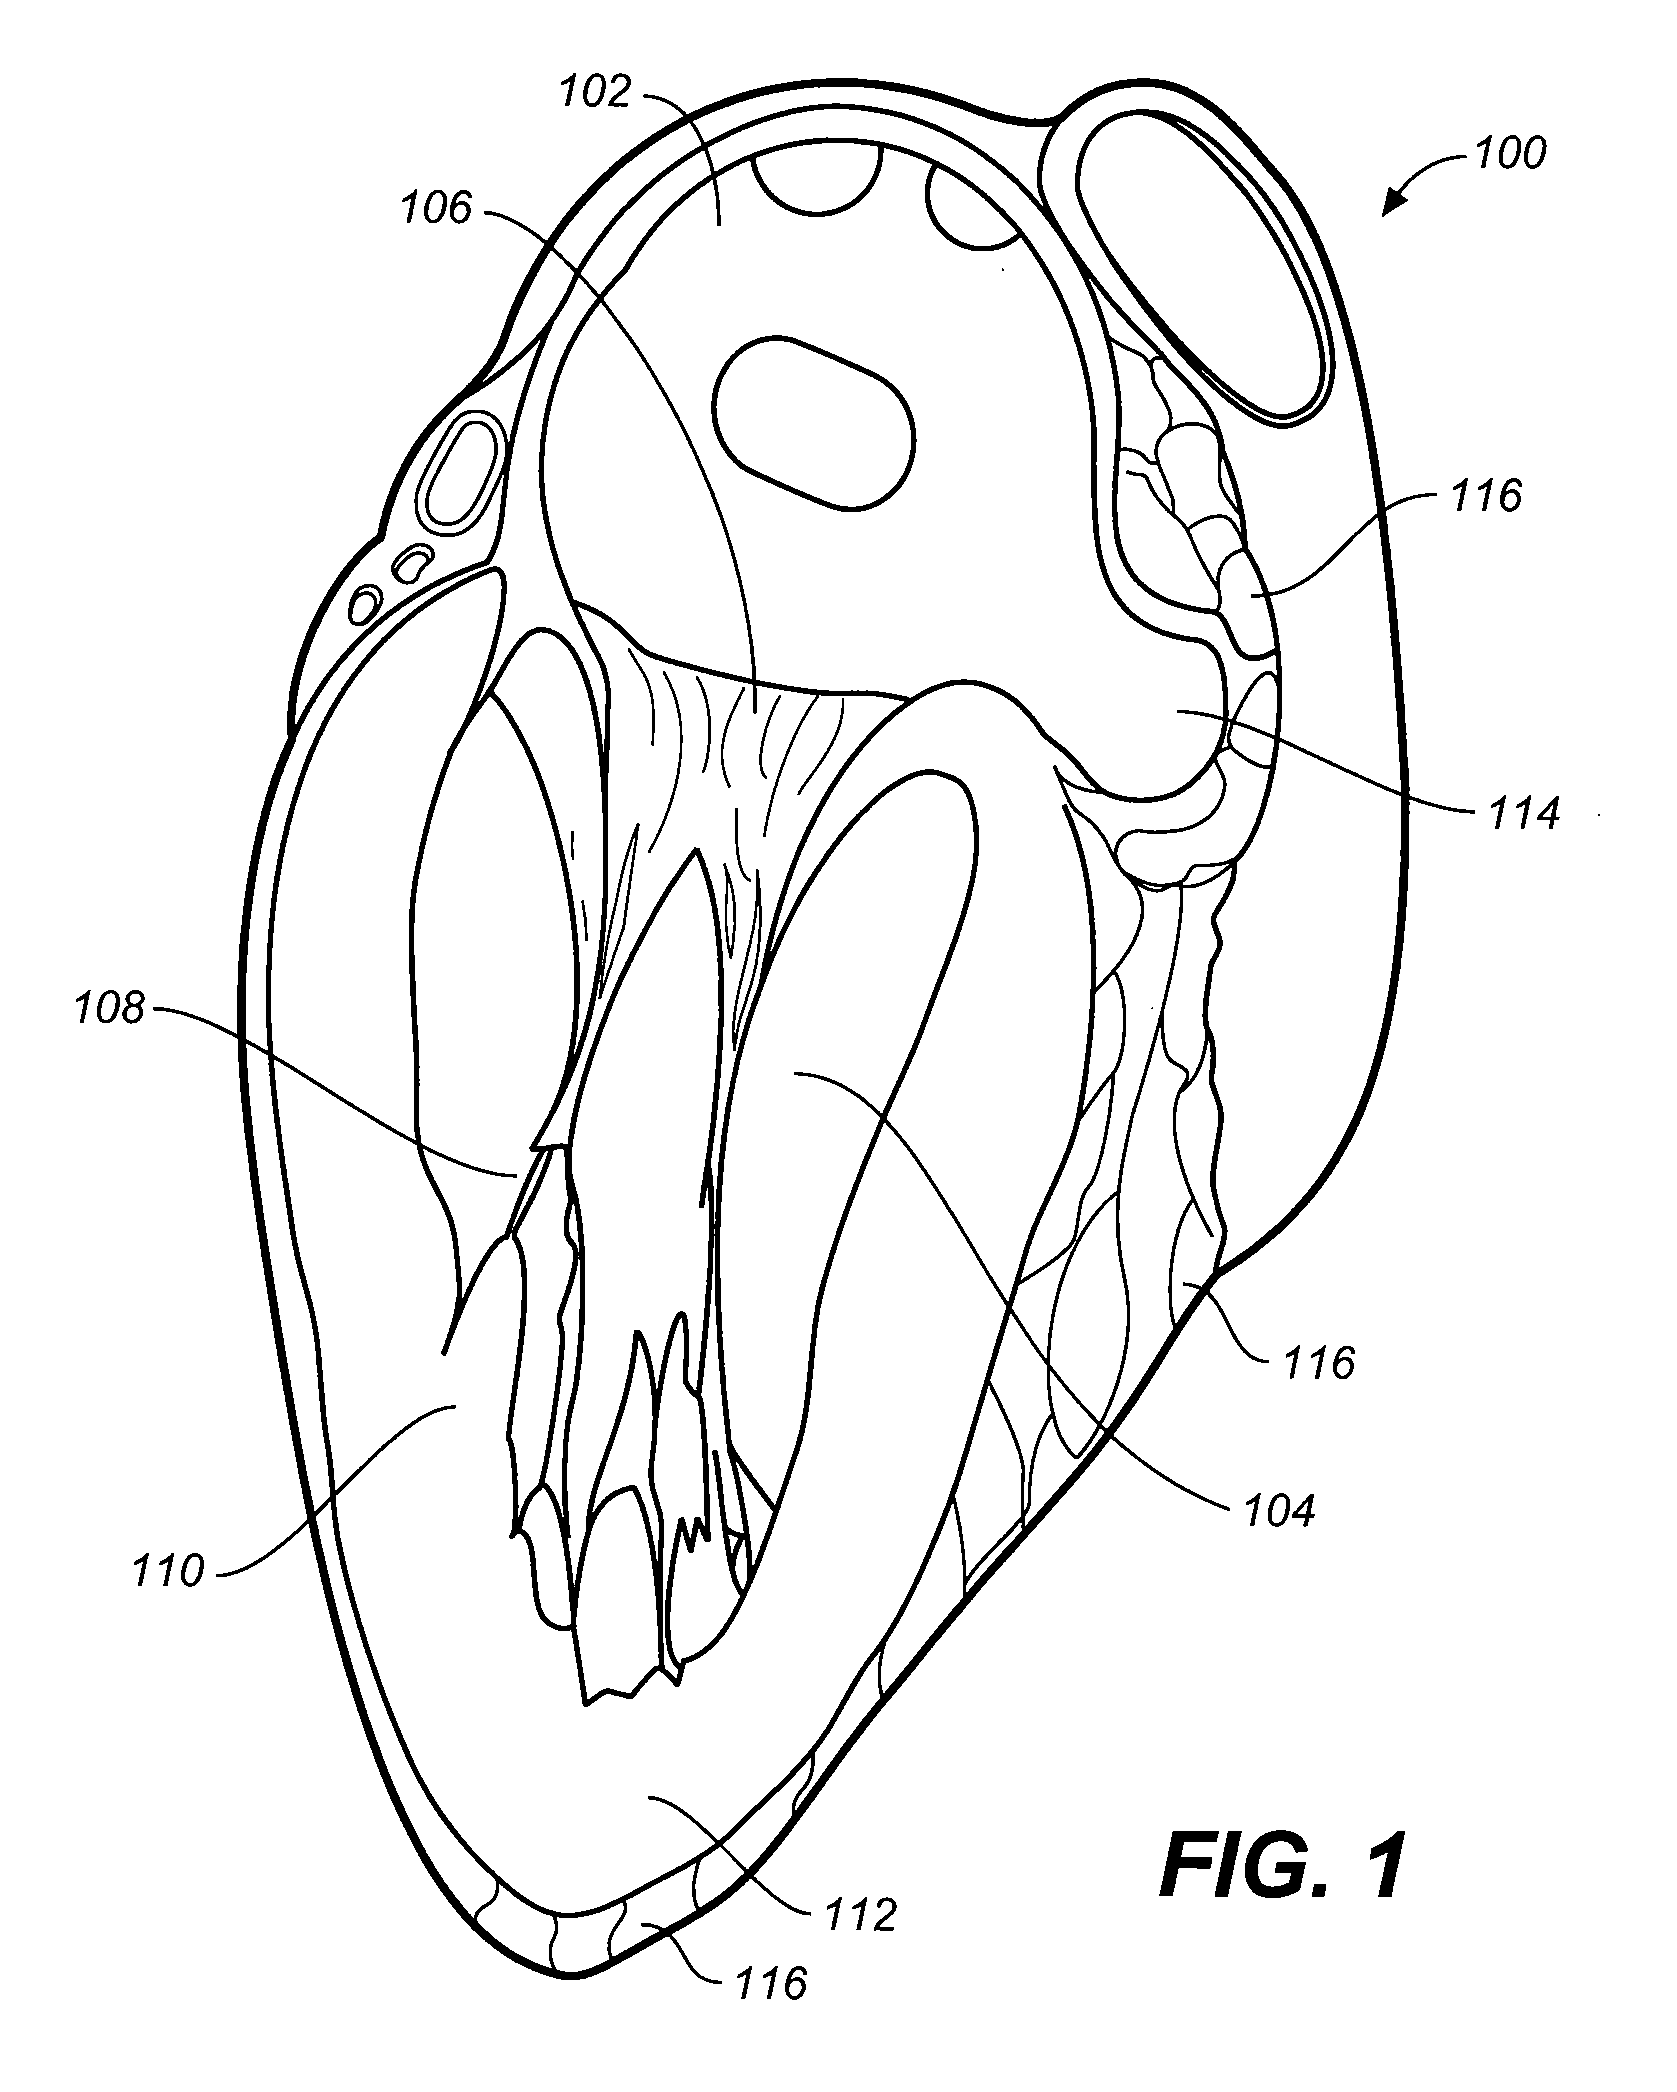 Devices, systems, and methods for closing the left atrial appendage